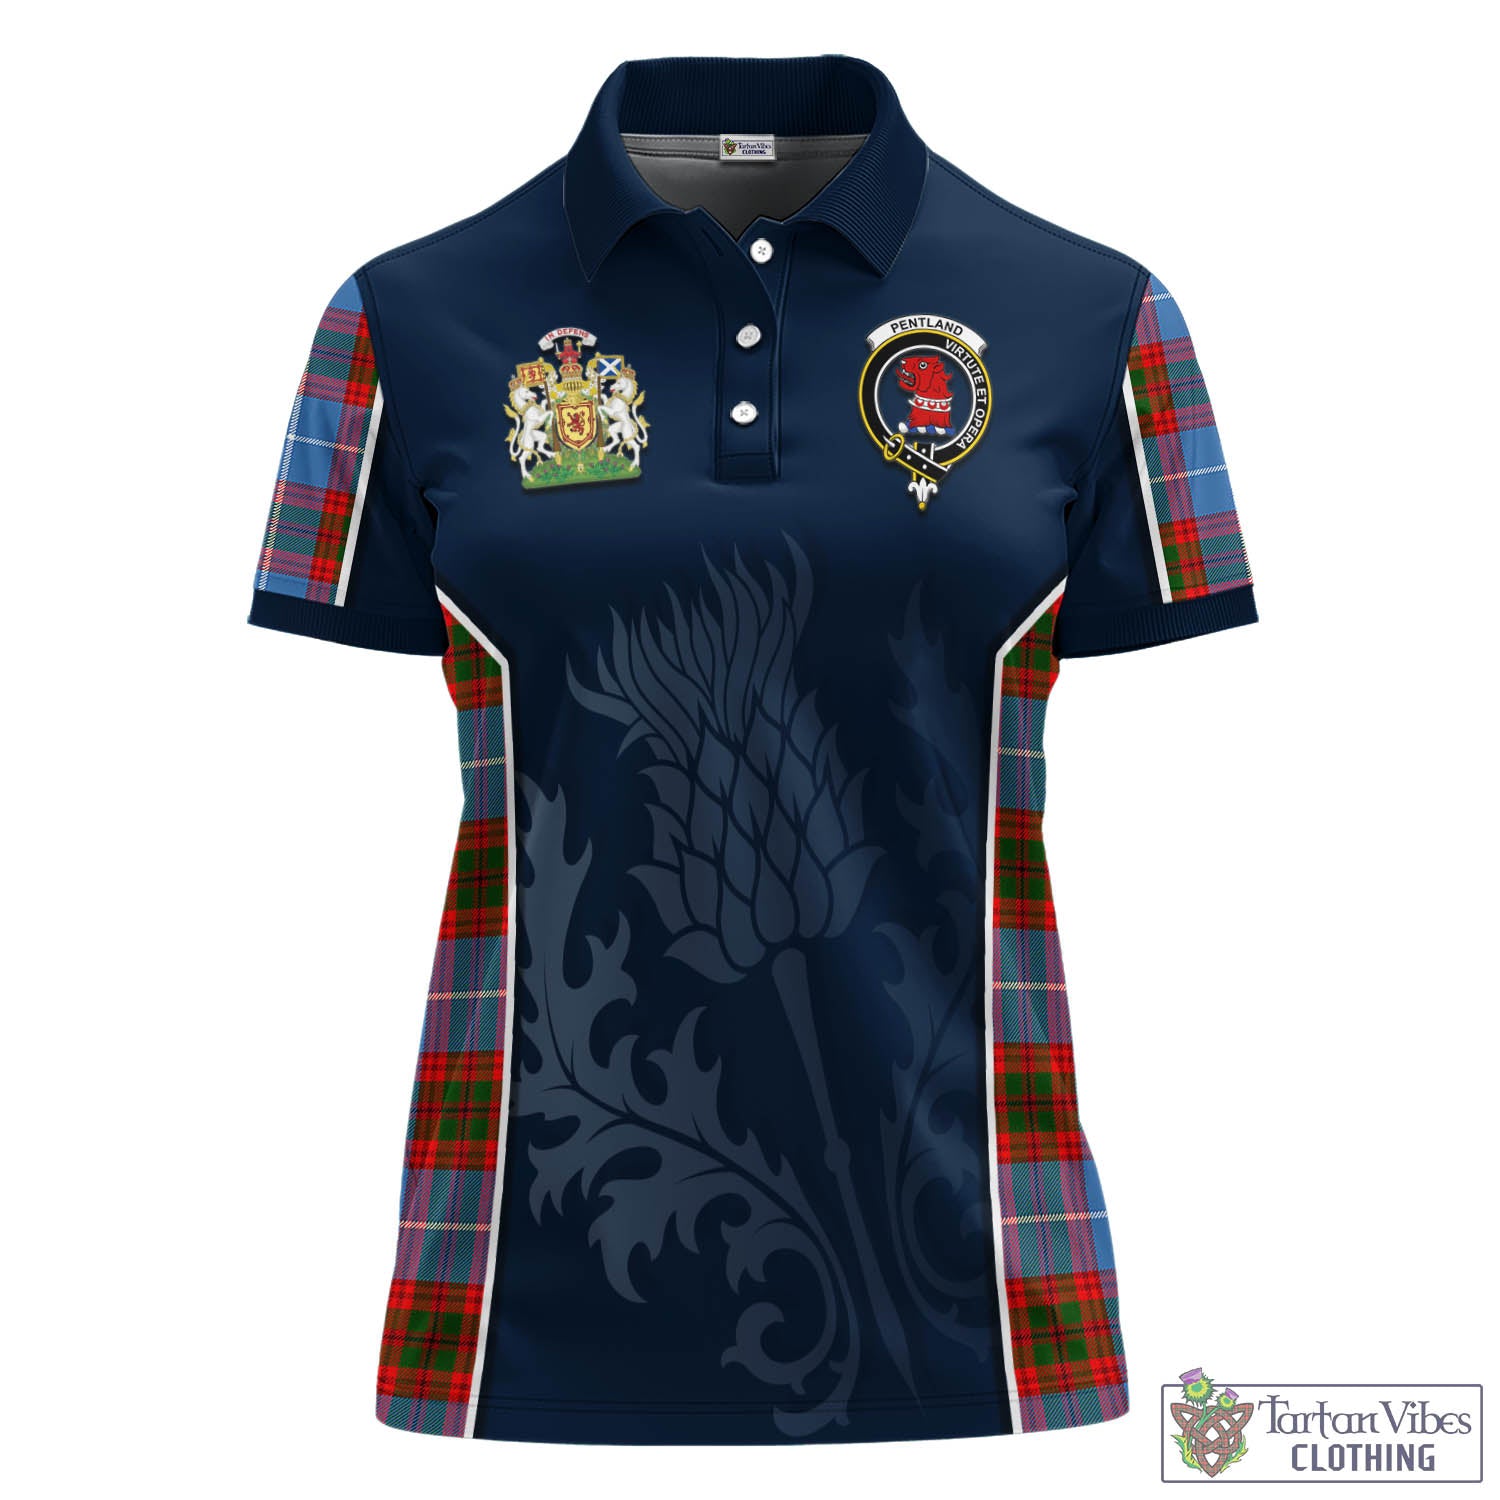 Tartan Vibes Clothing Pentland Tartan Women's Polo Shirt with Family Crest and Scottish Thistle Vibes Sport Style